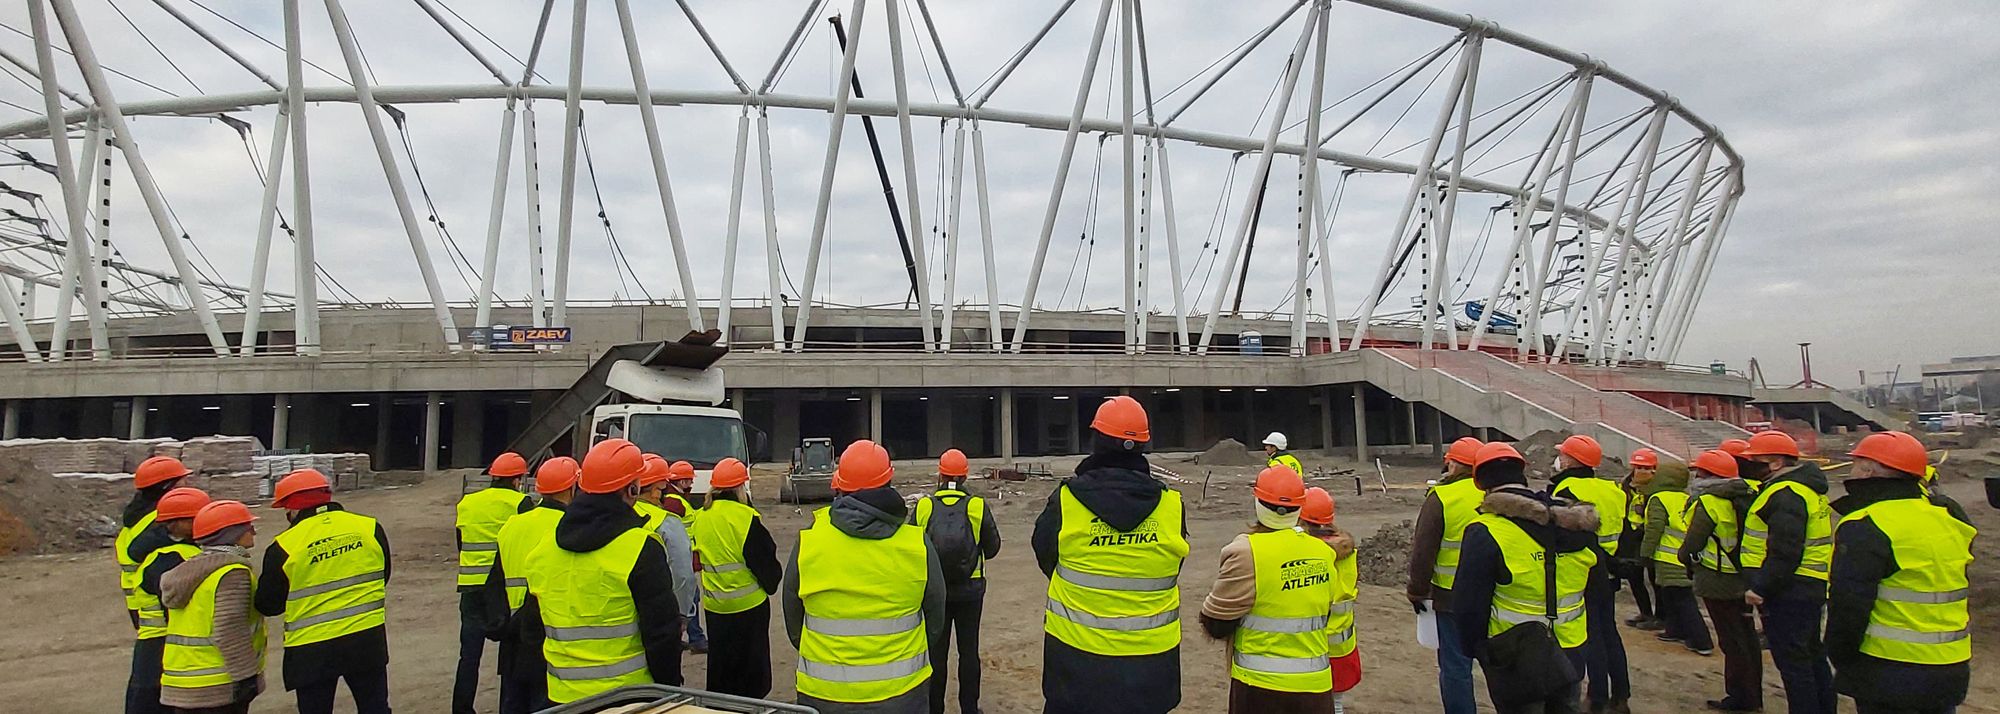 The stadium is due to be completed in March 2023